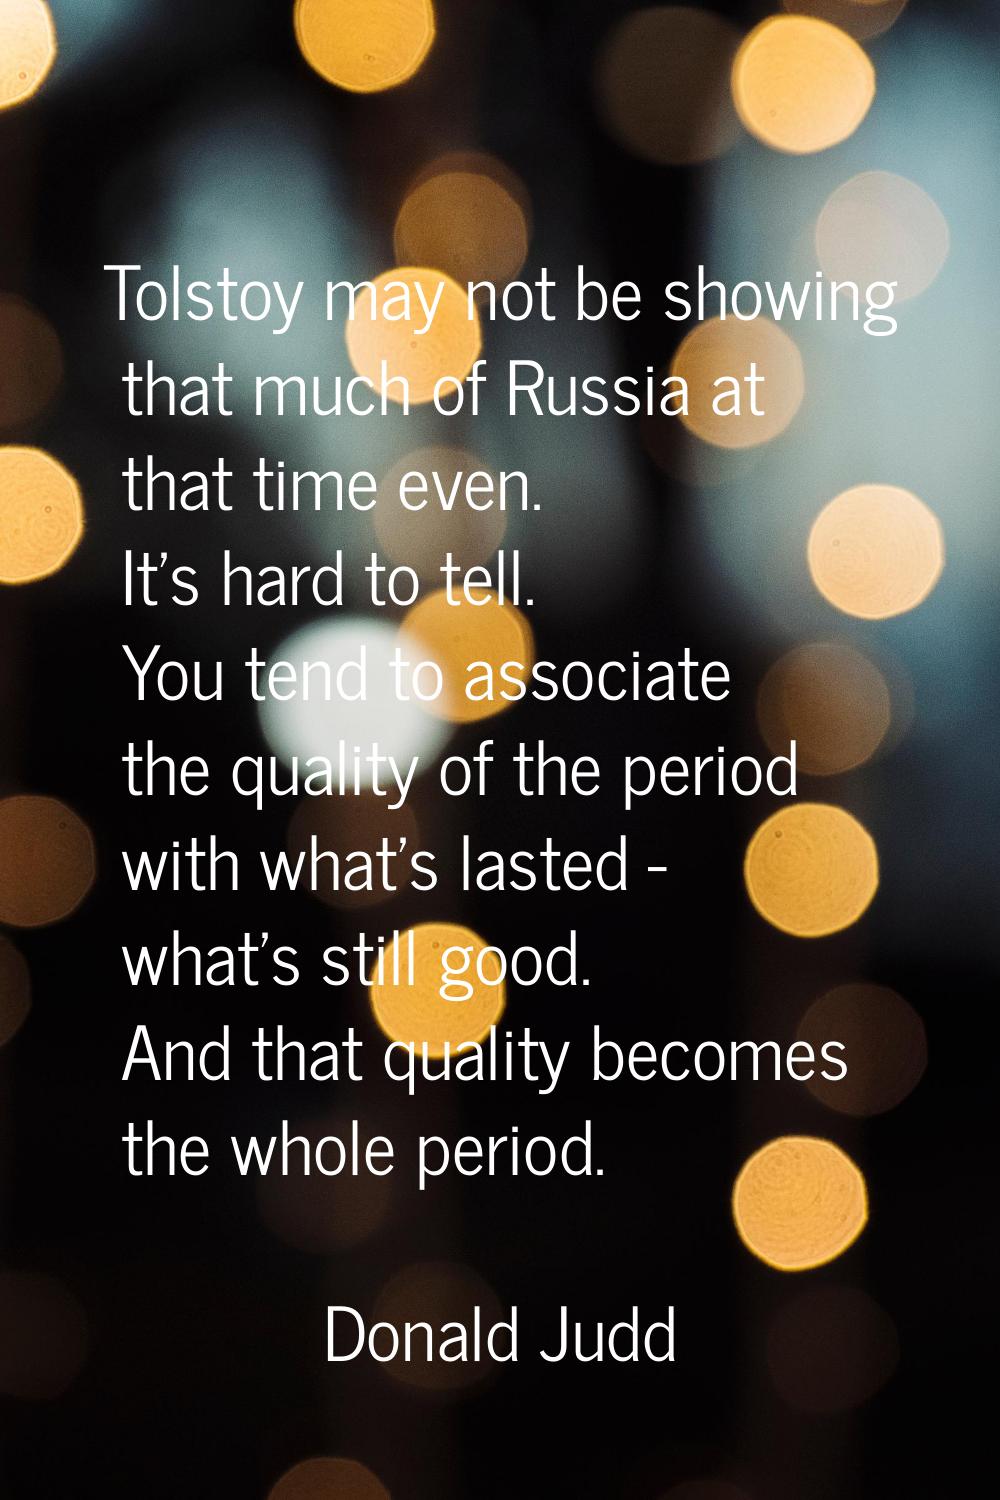 Tolstoy may not be showing that much of Russia at that time even. It's hard to tell. You tend to as